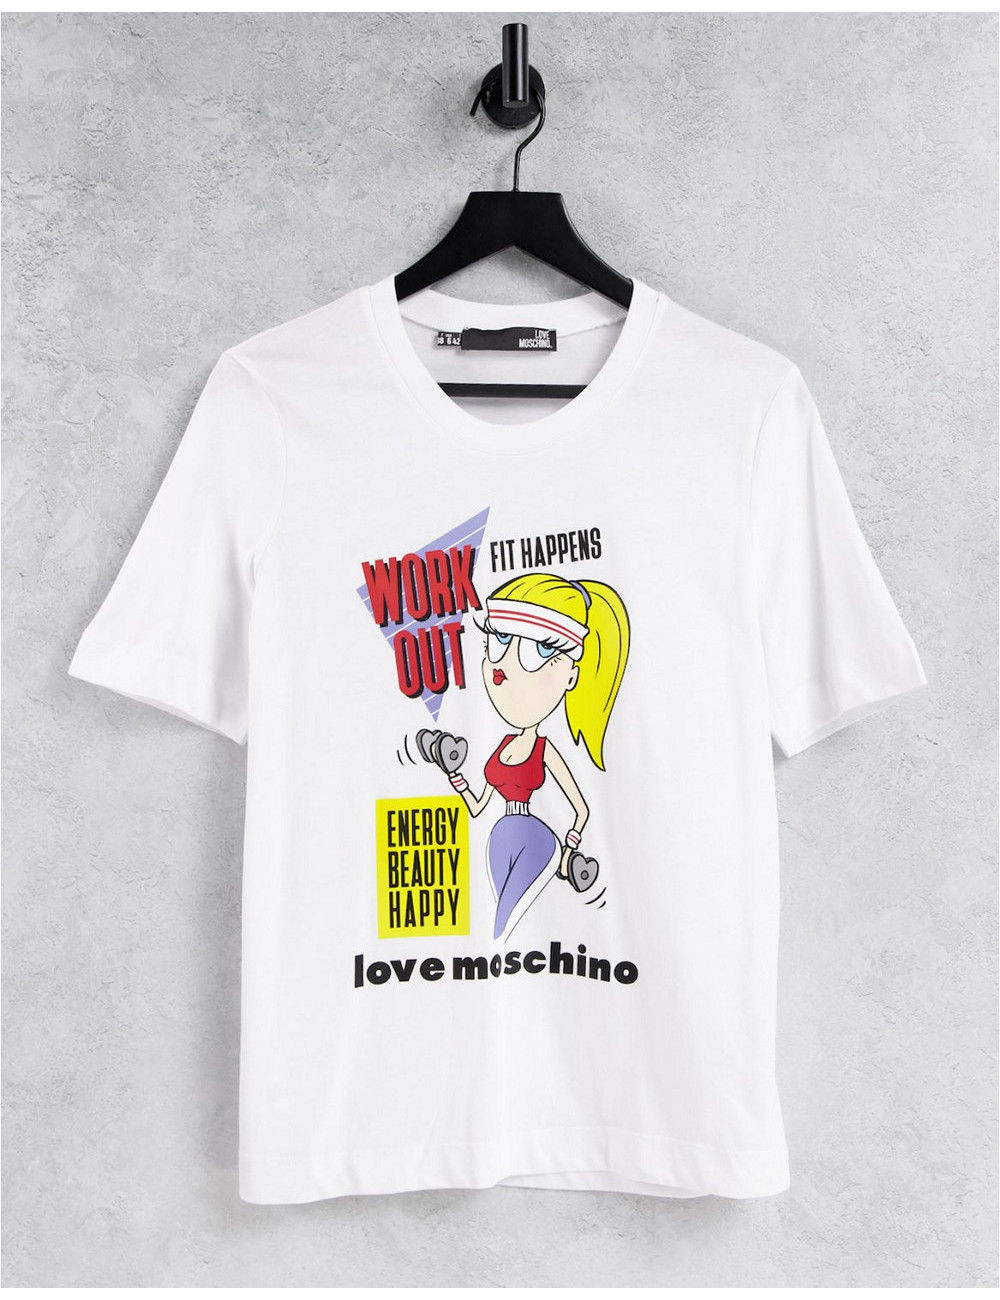 Love Moschino work out logo...